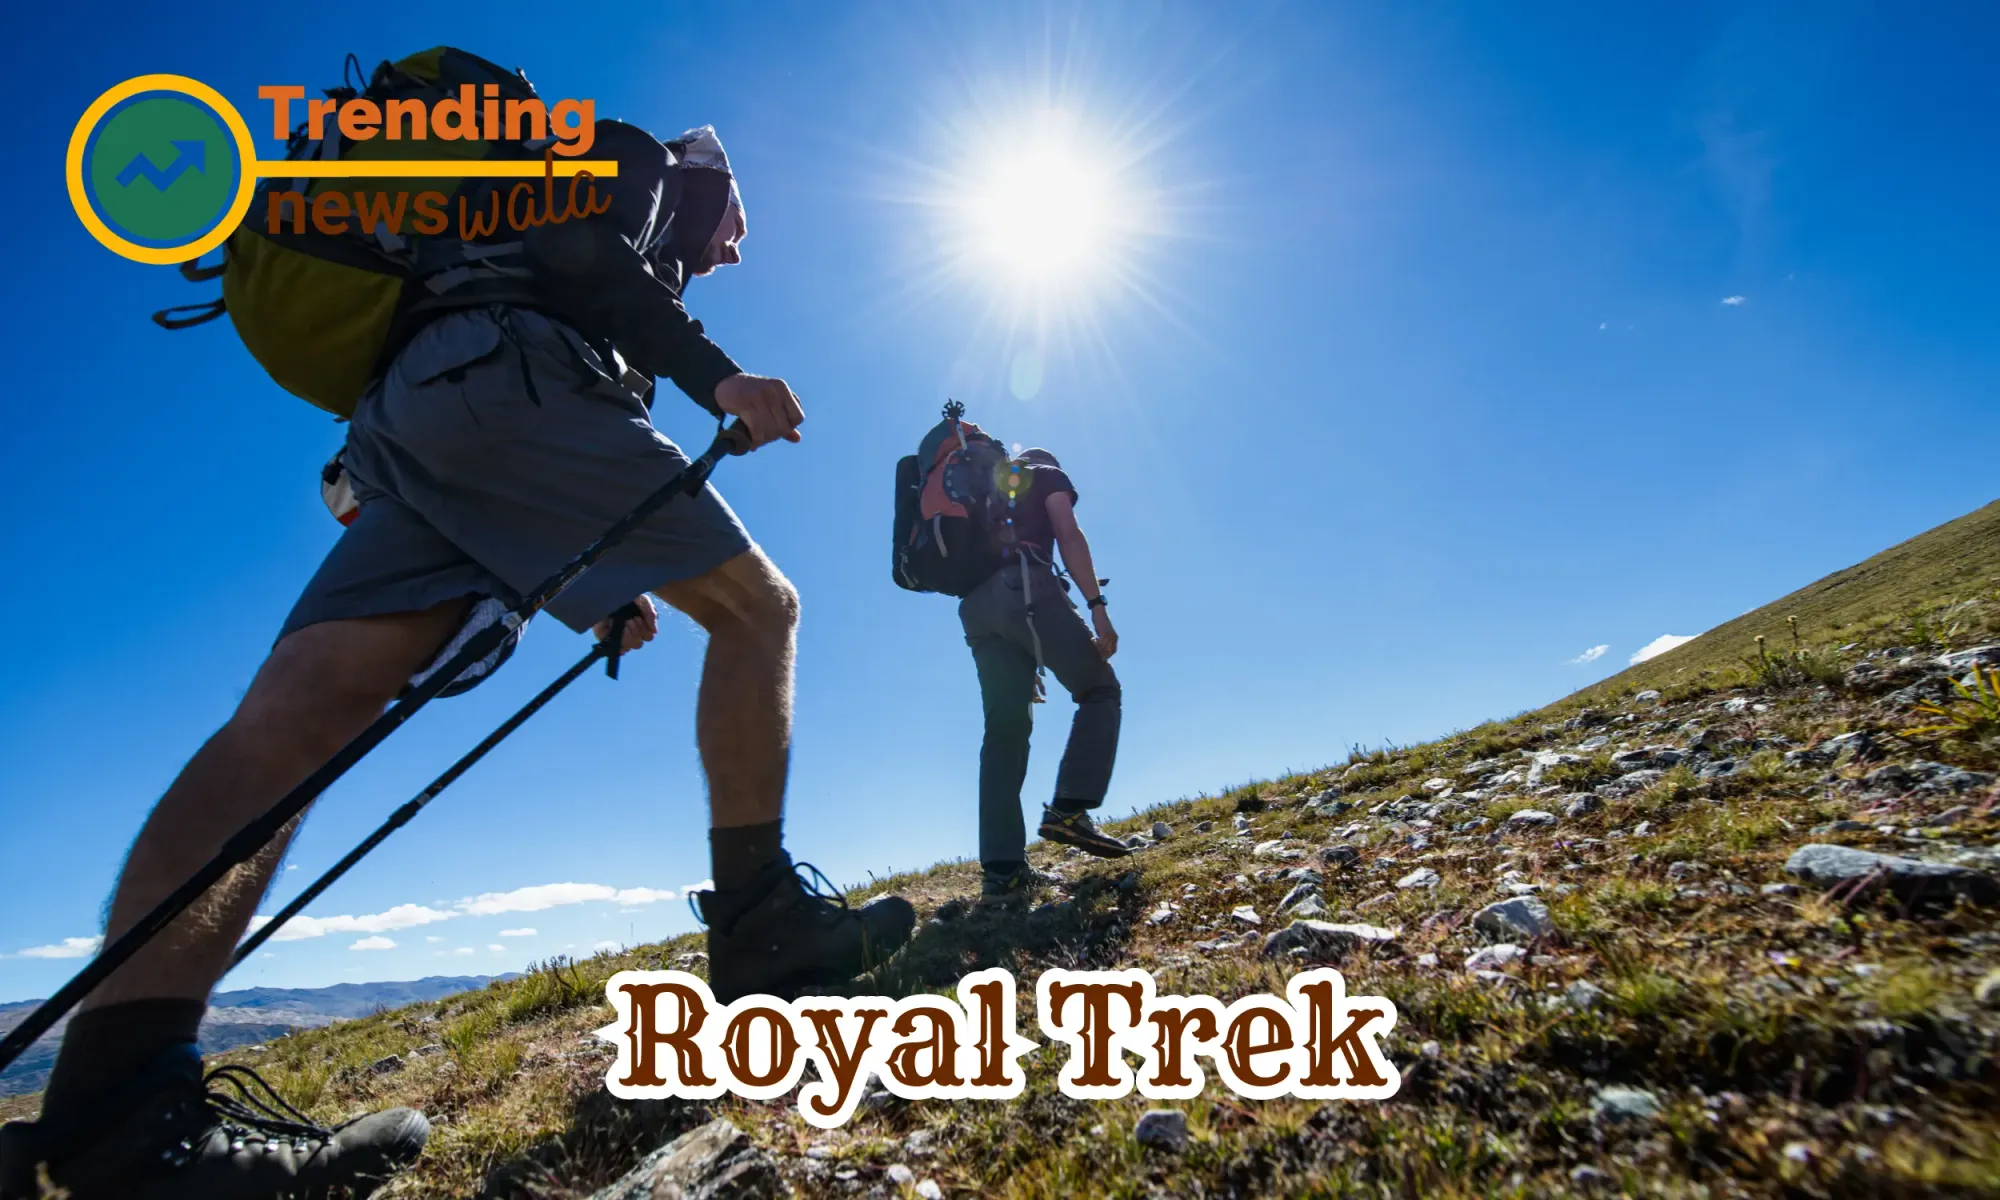 The Royal Trek is a relatively short and easy trek in the Annapurna region of Nepal